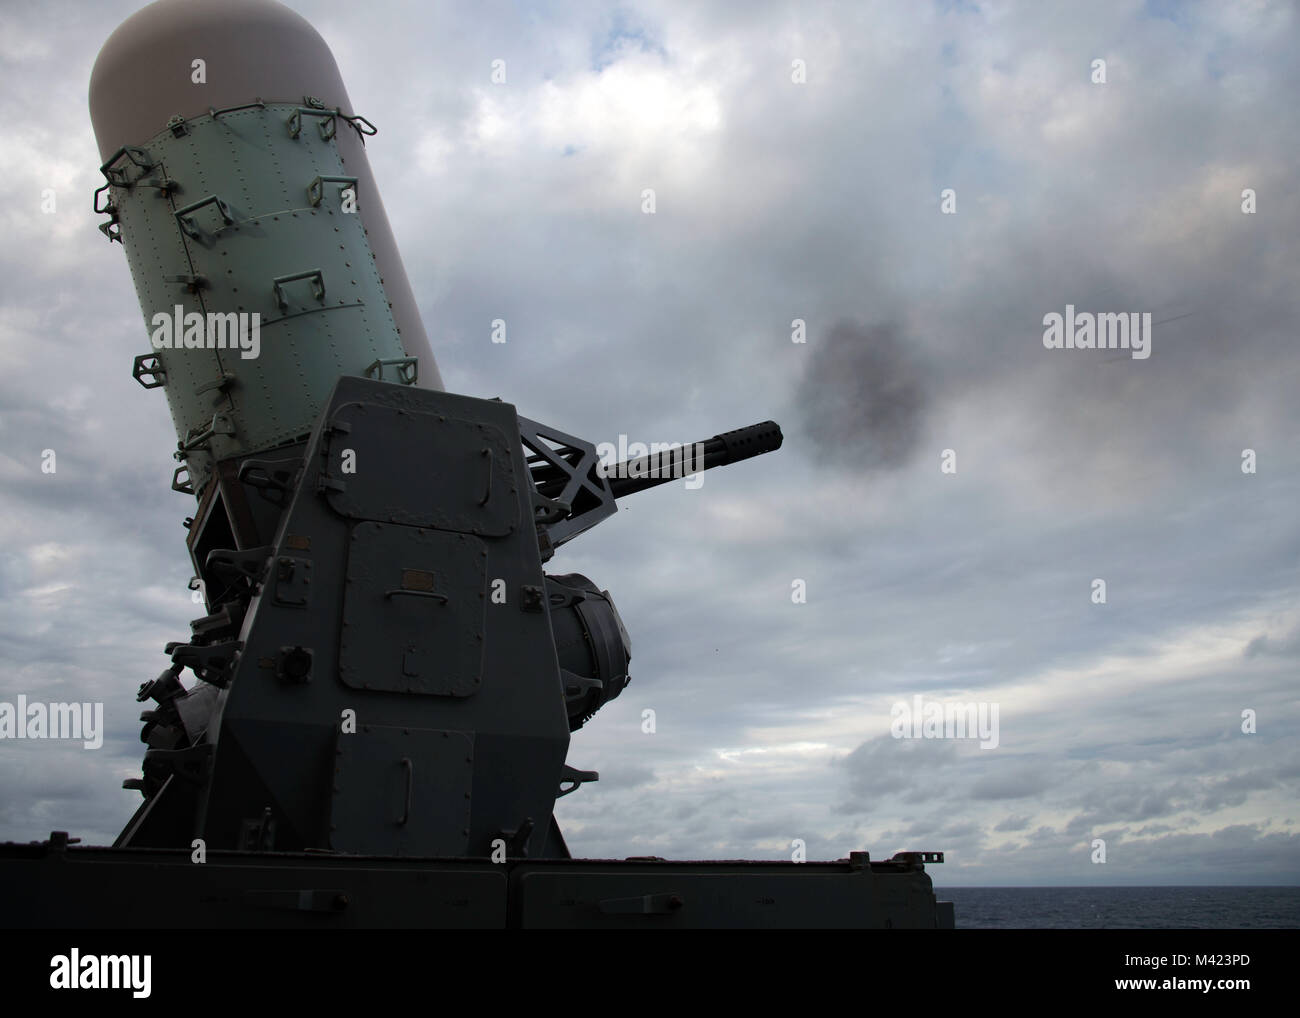 MAYPORT, Fla. (Feb. 8, 2018) The aft close-in weapons system (CIWS) fires from the fantail of the amphibious assault ship USS Iwo Jima (LHD 7).  The Iwo Jima Amphibious Ready Group (ARG) is deployed in support of maritime security operations and theater security cooperation efforts in Europe and the Middle East.  The Iwo Jima ARG embarks the 26th Marine Expeditionary Unit and includes Iwo Jima, the amphibious transport dock ship USS New York (LPD 21), the dock landing ship USS Oak Hill (LSD 51), Fleet Surgical Team 8, Helicopter Sea Combat Squadron 28, Tactical Air Control Squadron 22, compone Stock Photo